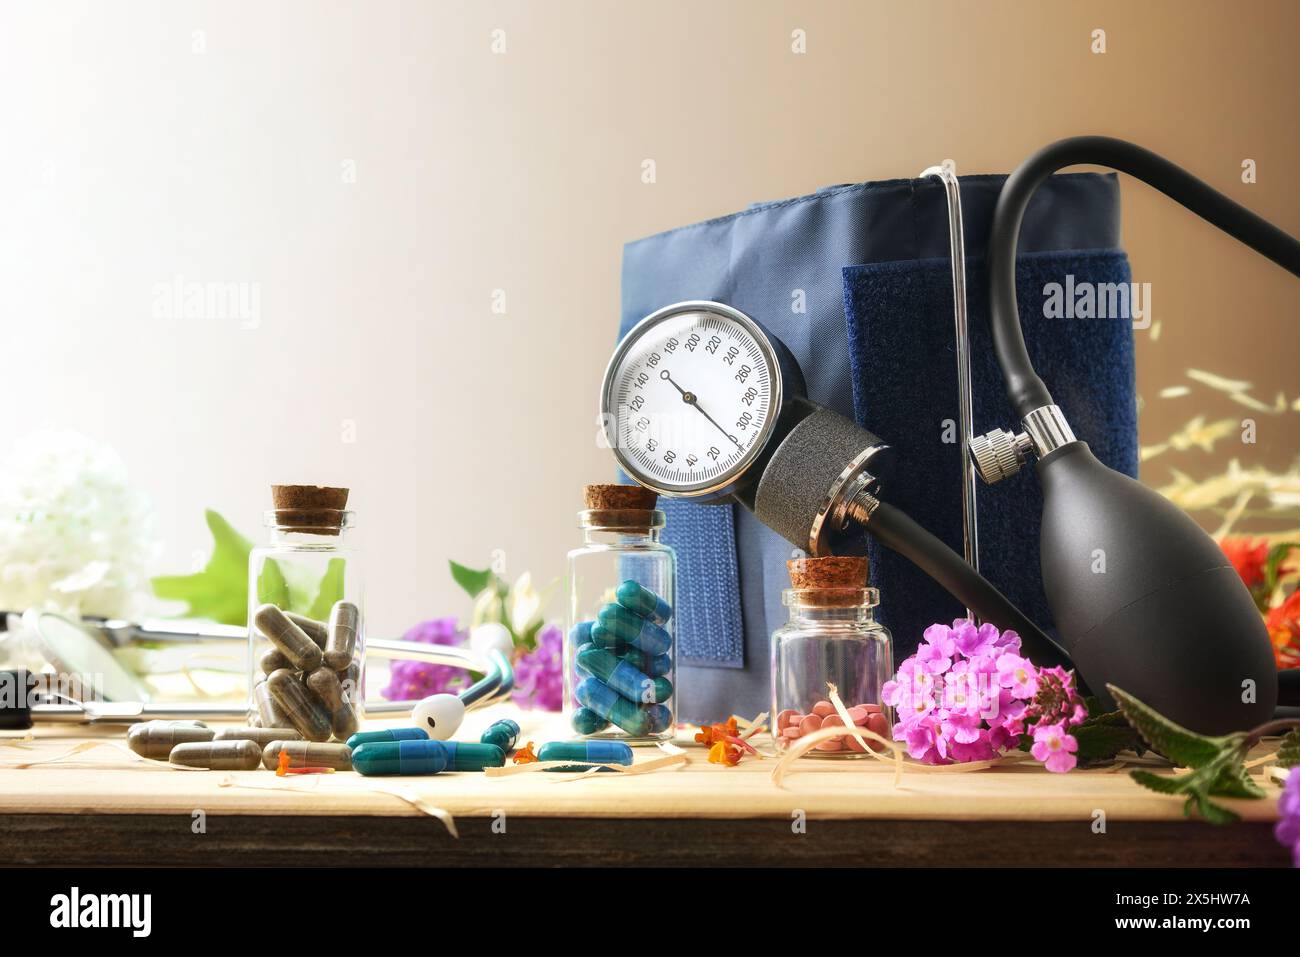 Concept of natural medicines from plants for the treatment of blood pressure problems with glass bottles, blood pressure monitor and flowers on wooden Stock Photo